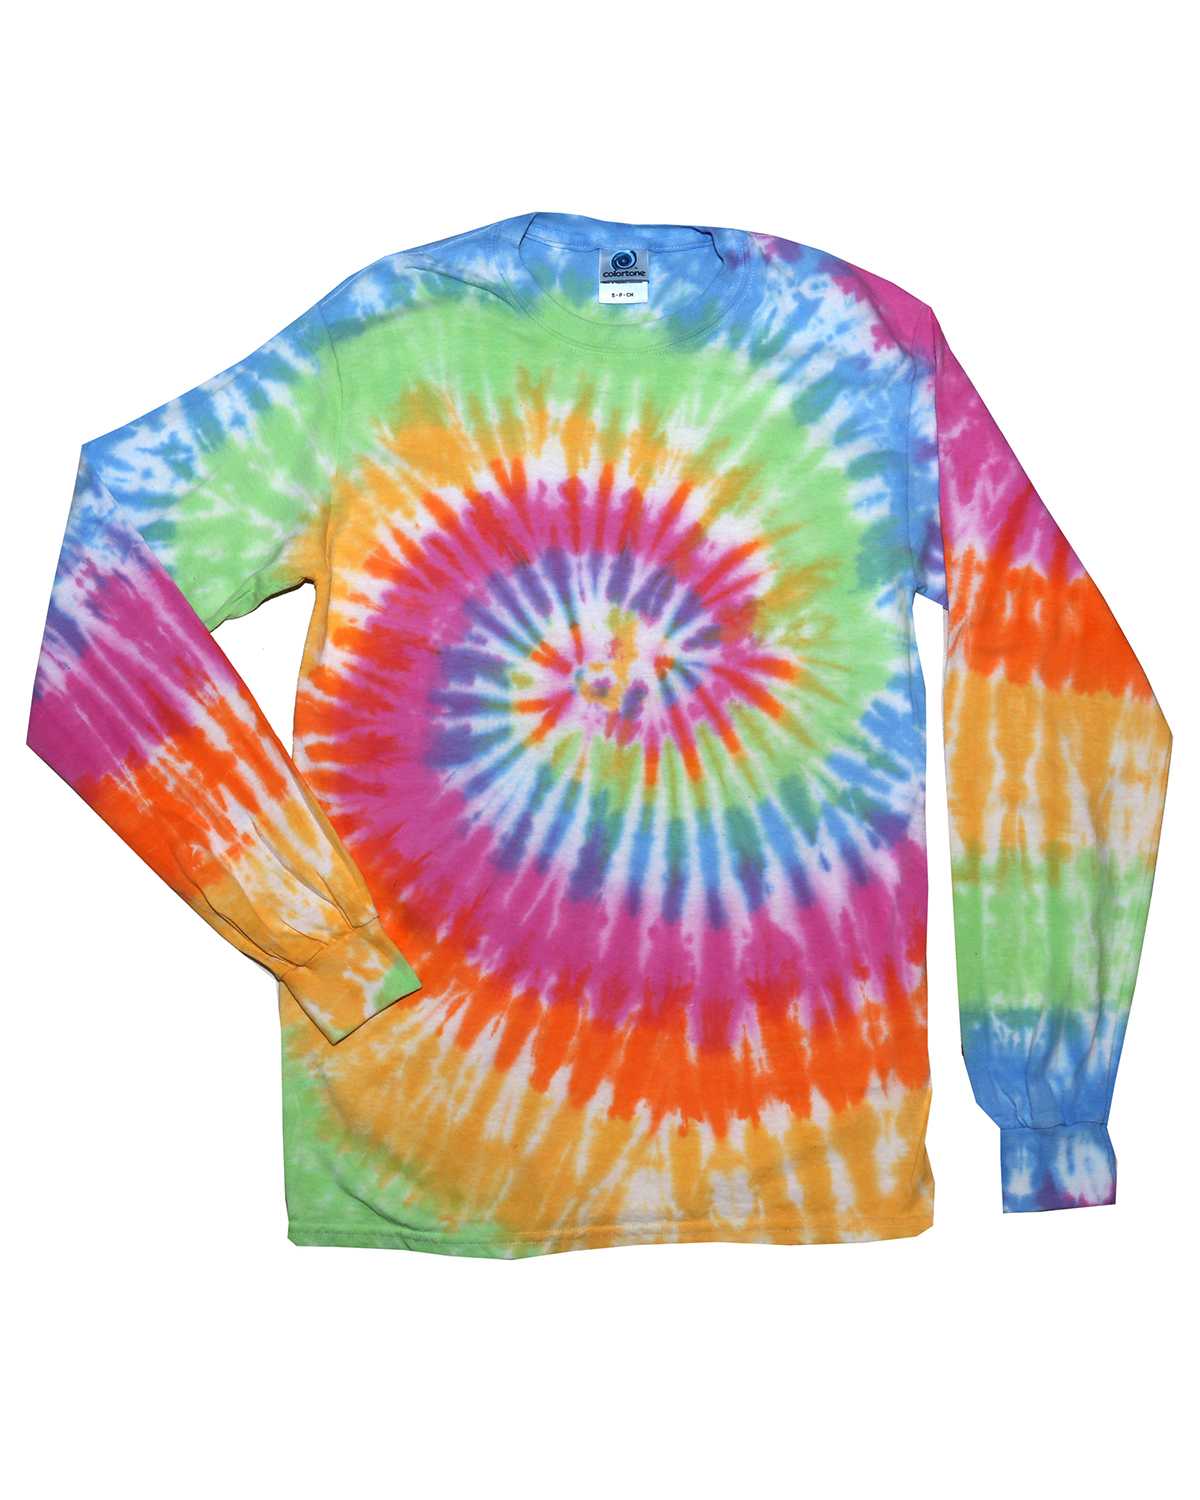 Tie-Dye CD2000 Adult 5.4 oz., 100% Cotton Long-Sleeve Tie-Dyed T-Shirt ...